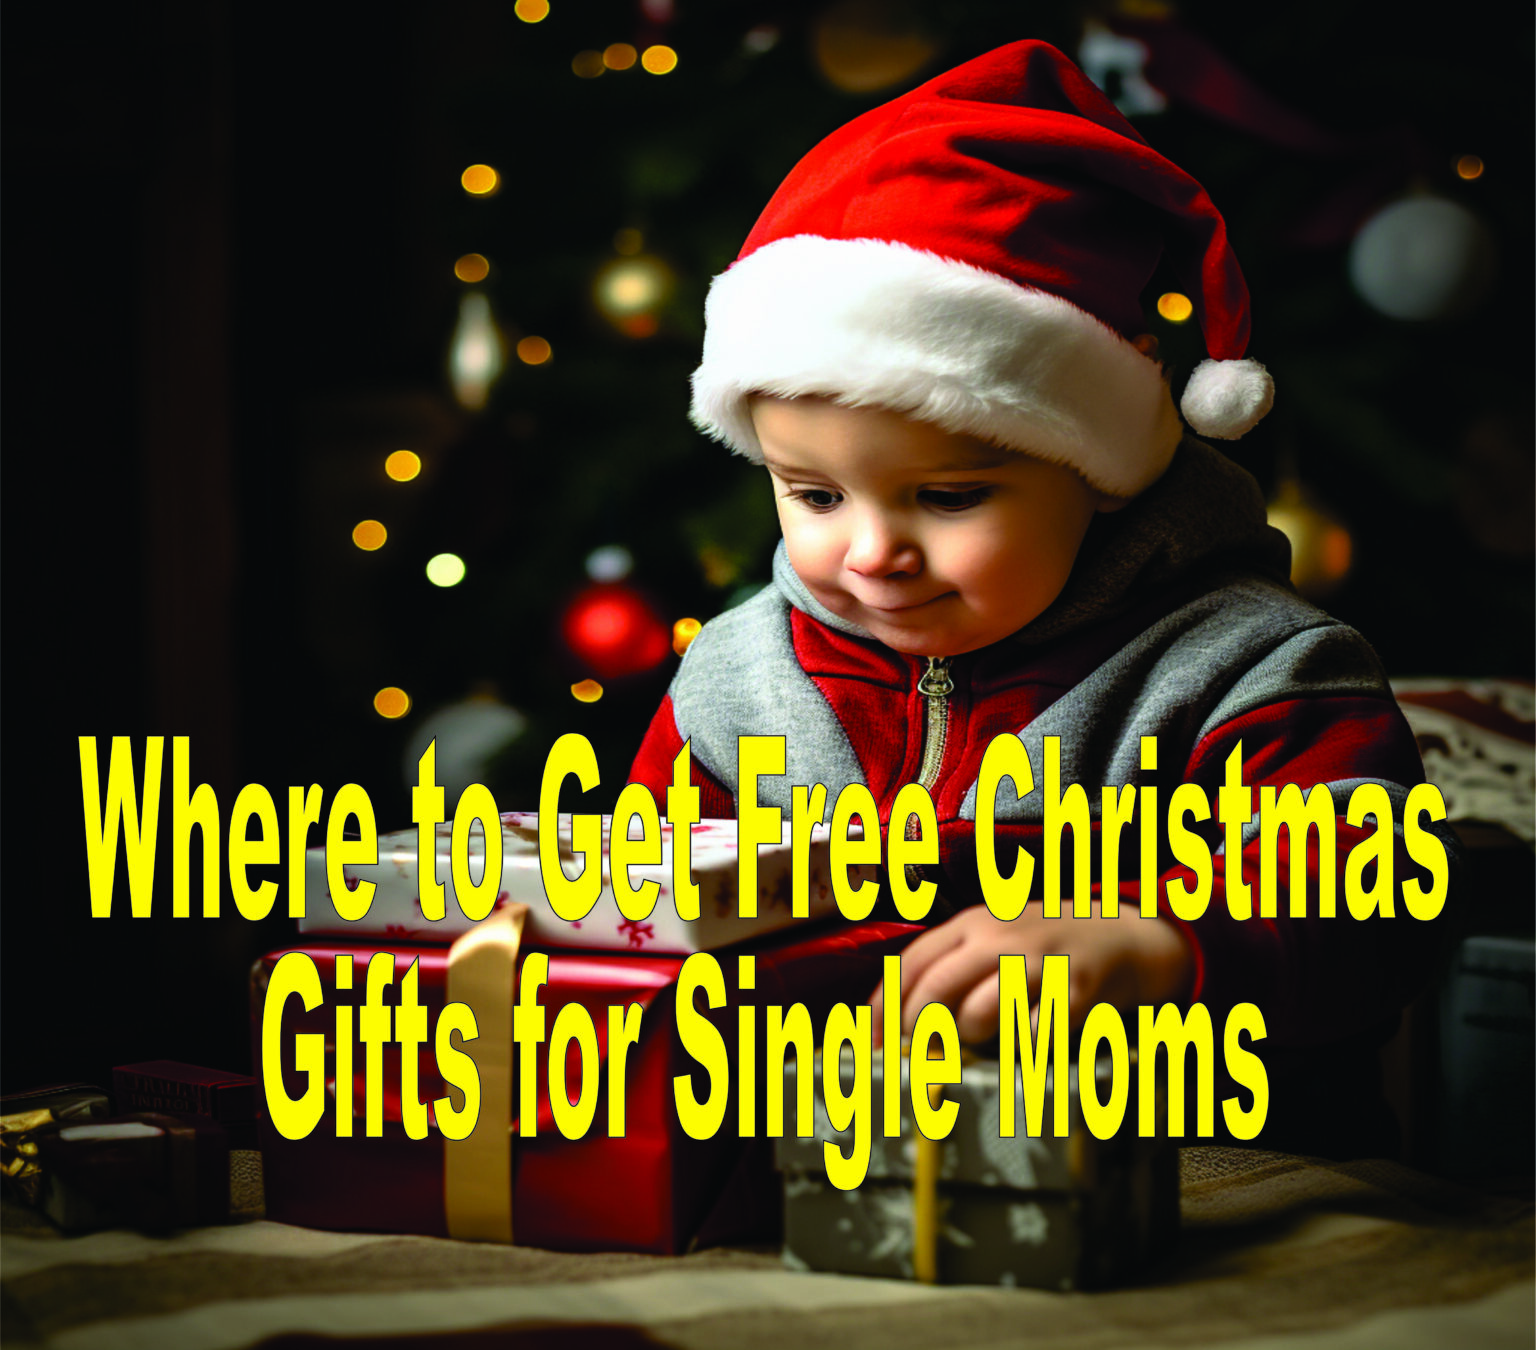 where-to-get-free-christmas-gifts-for-single-moms